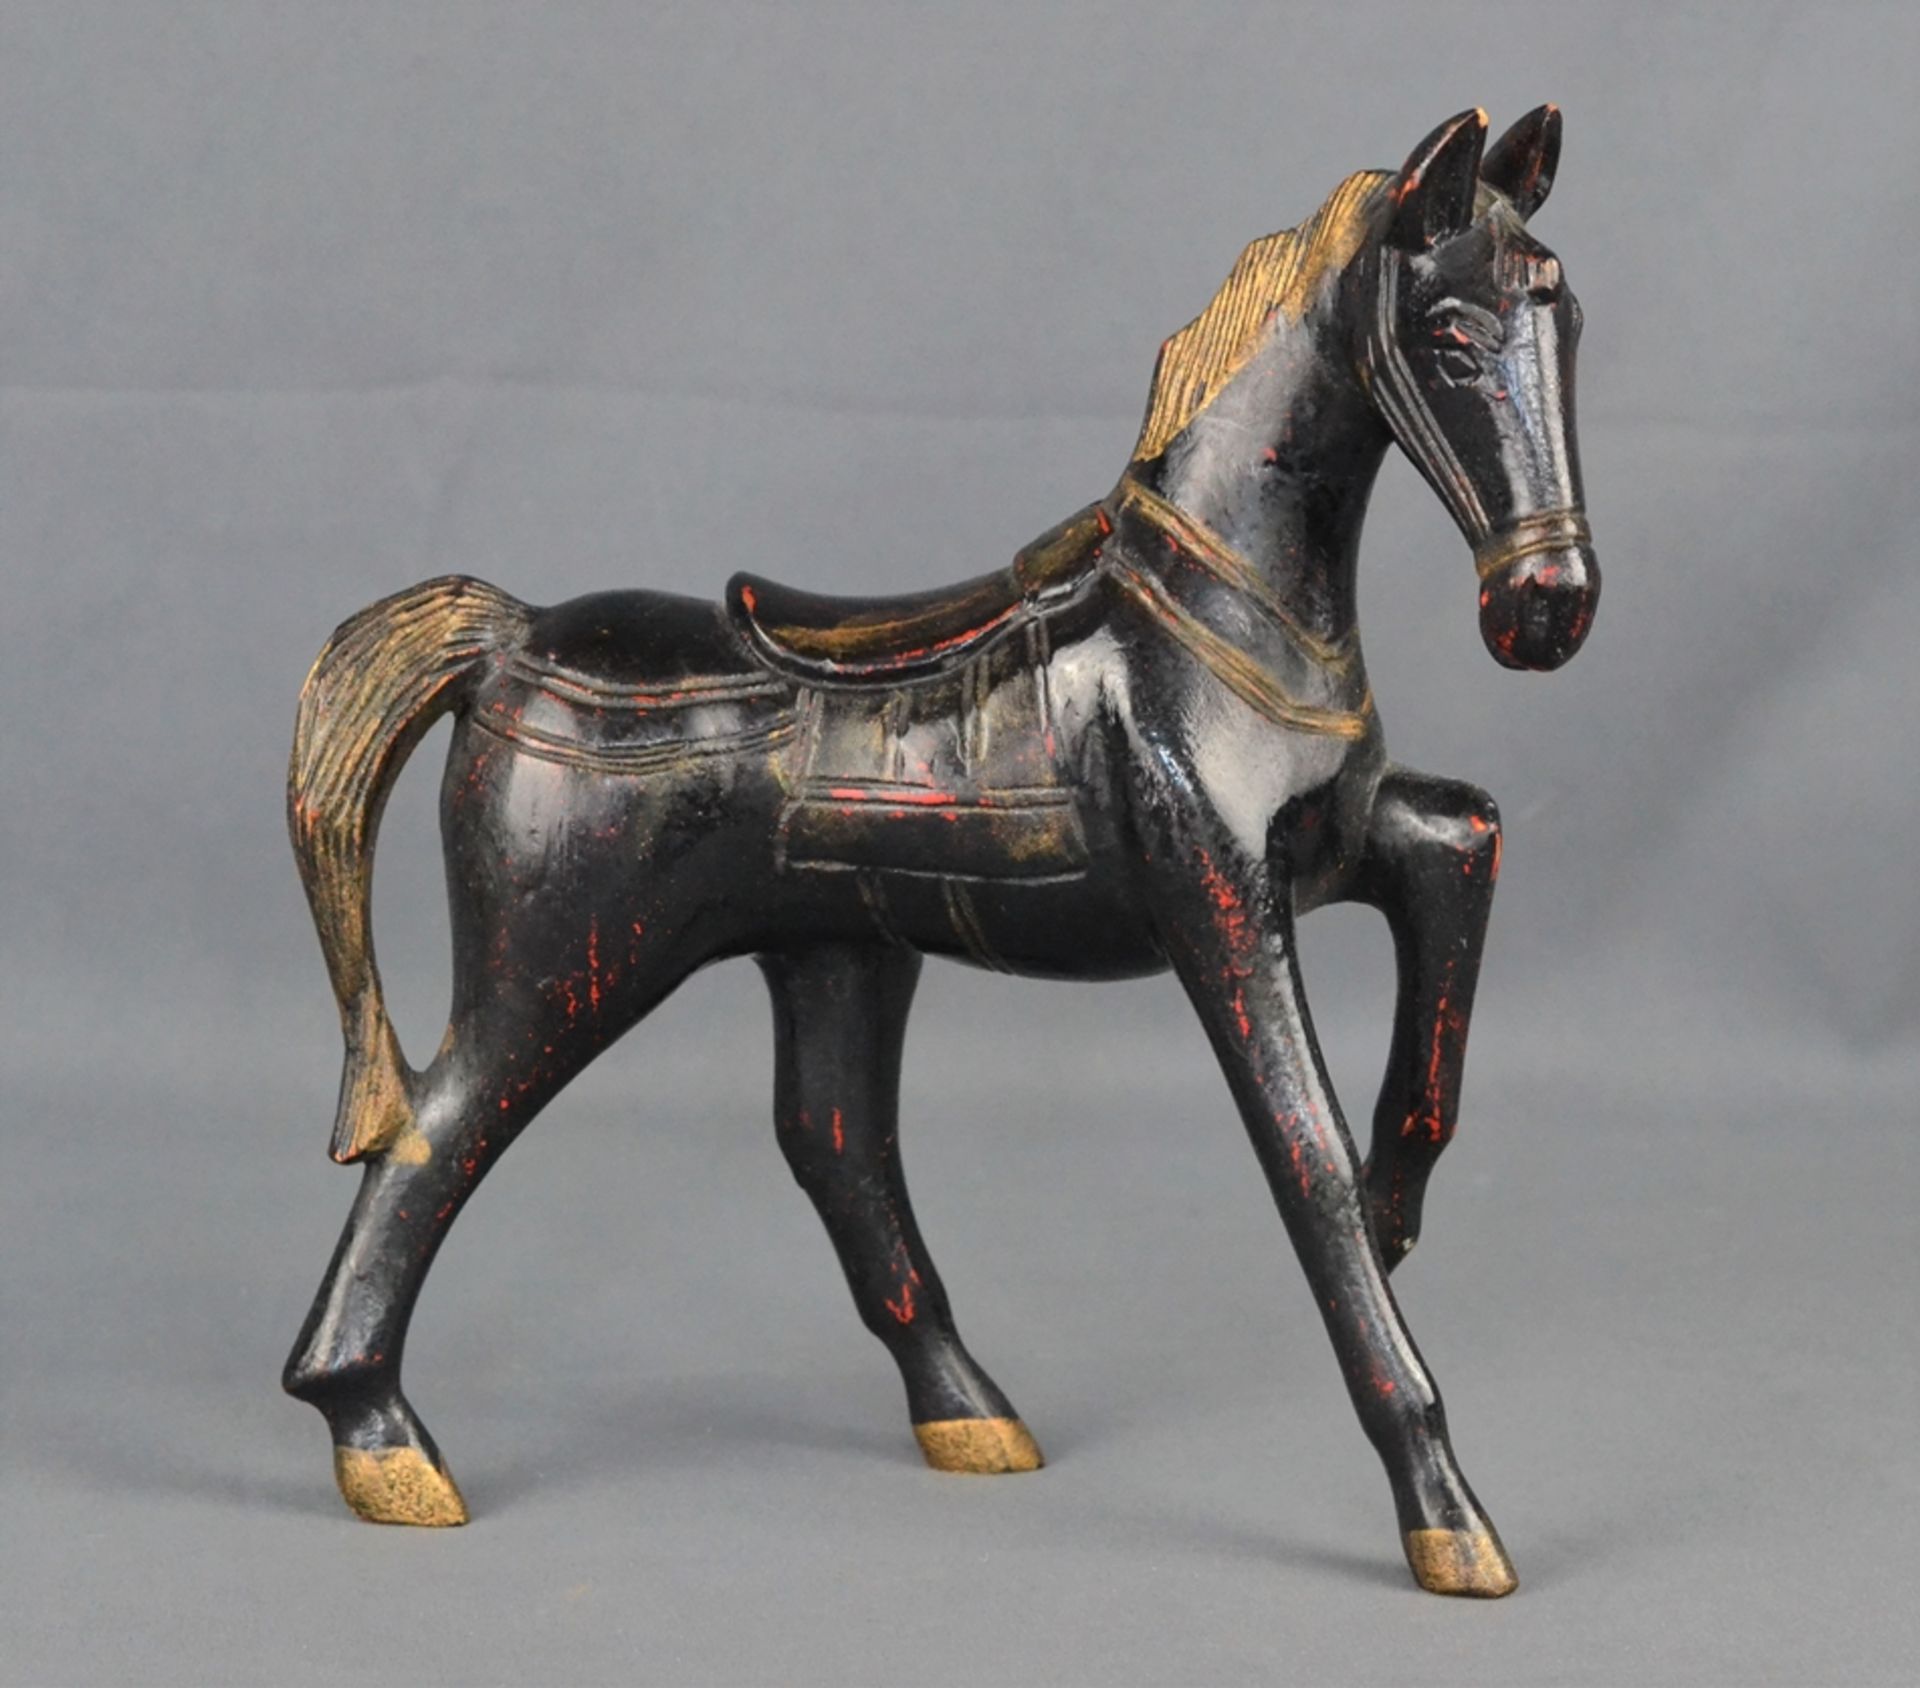 Decorative wooden horse, wood painted black, partially gilded, 20th century, 26x23x6cm